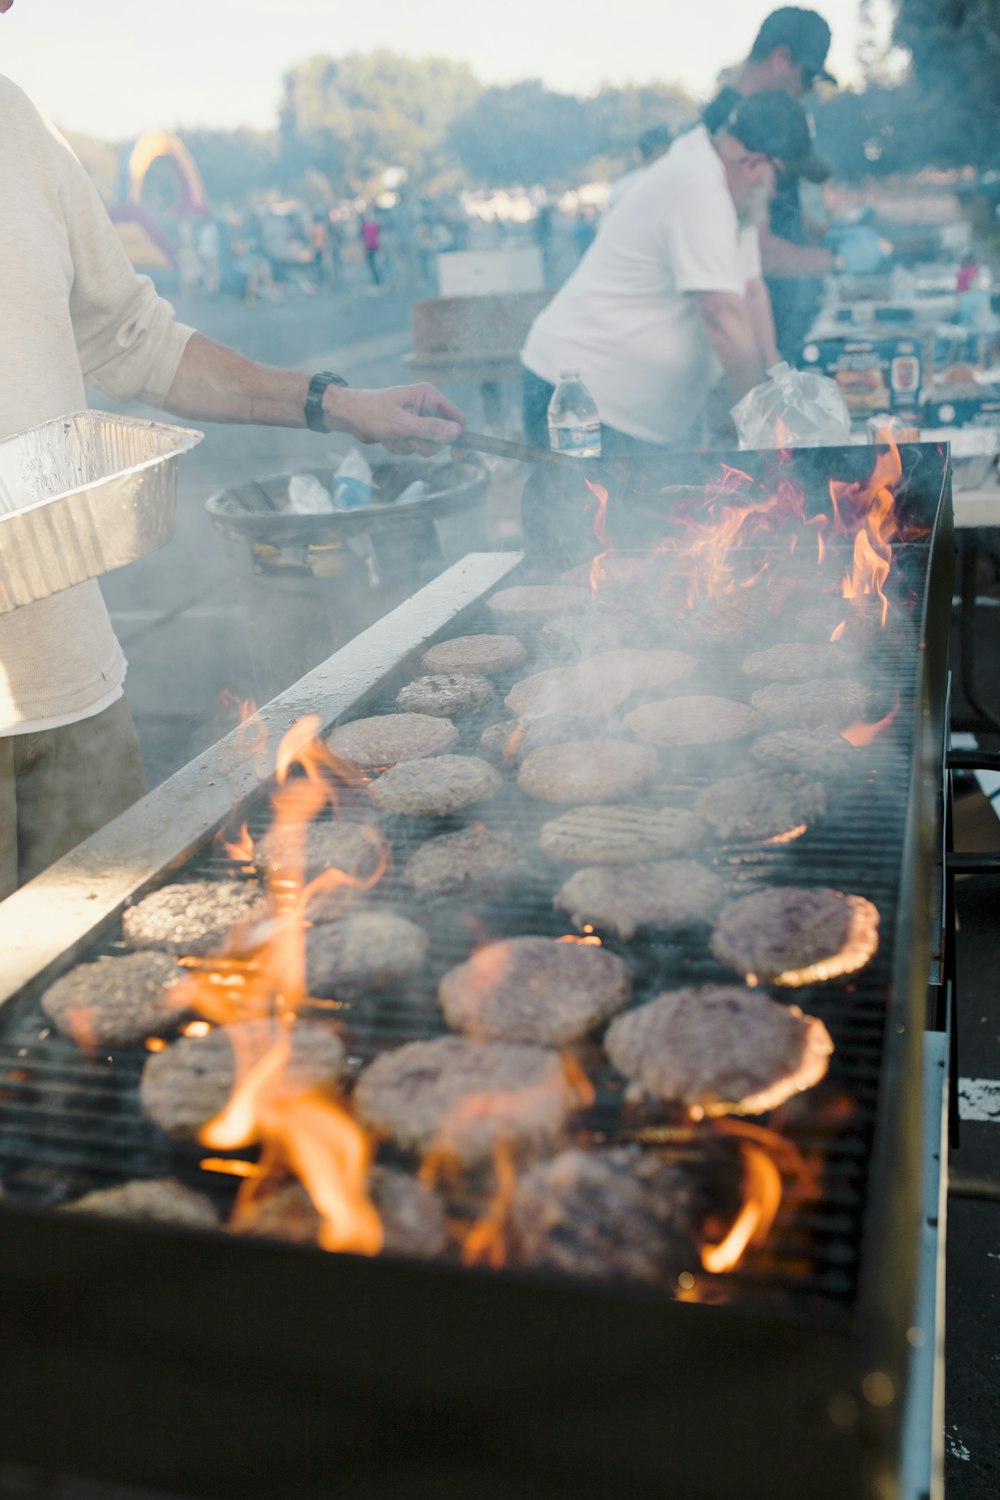 a man cooking hamburgers on a grill with flames